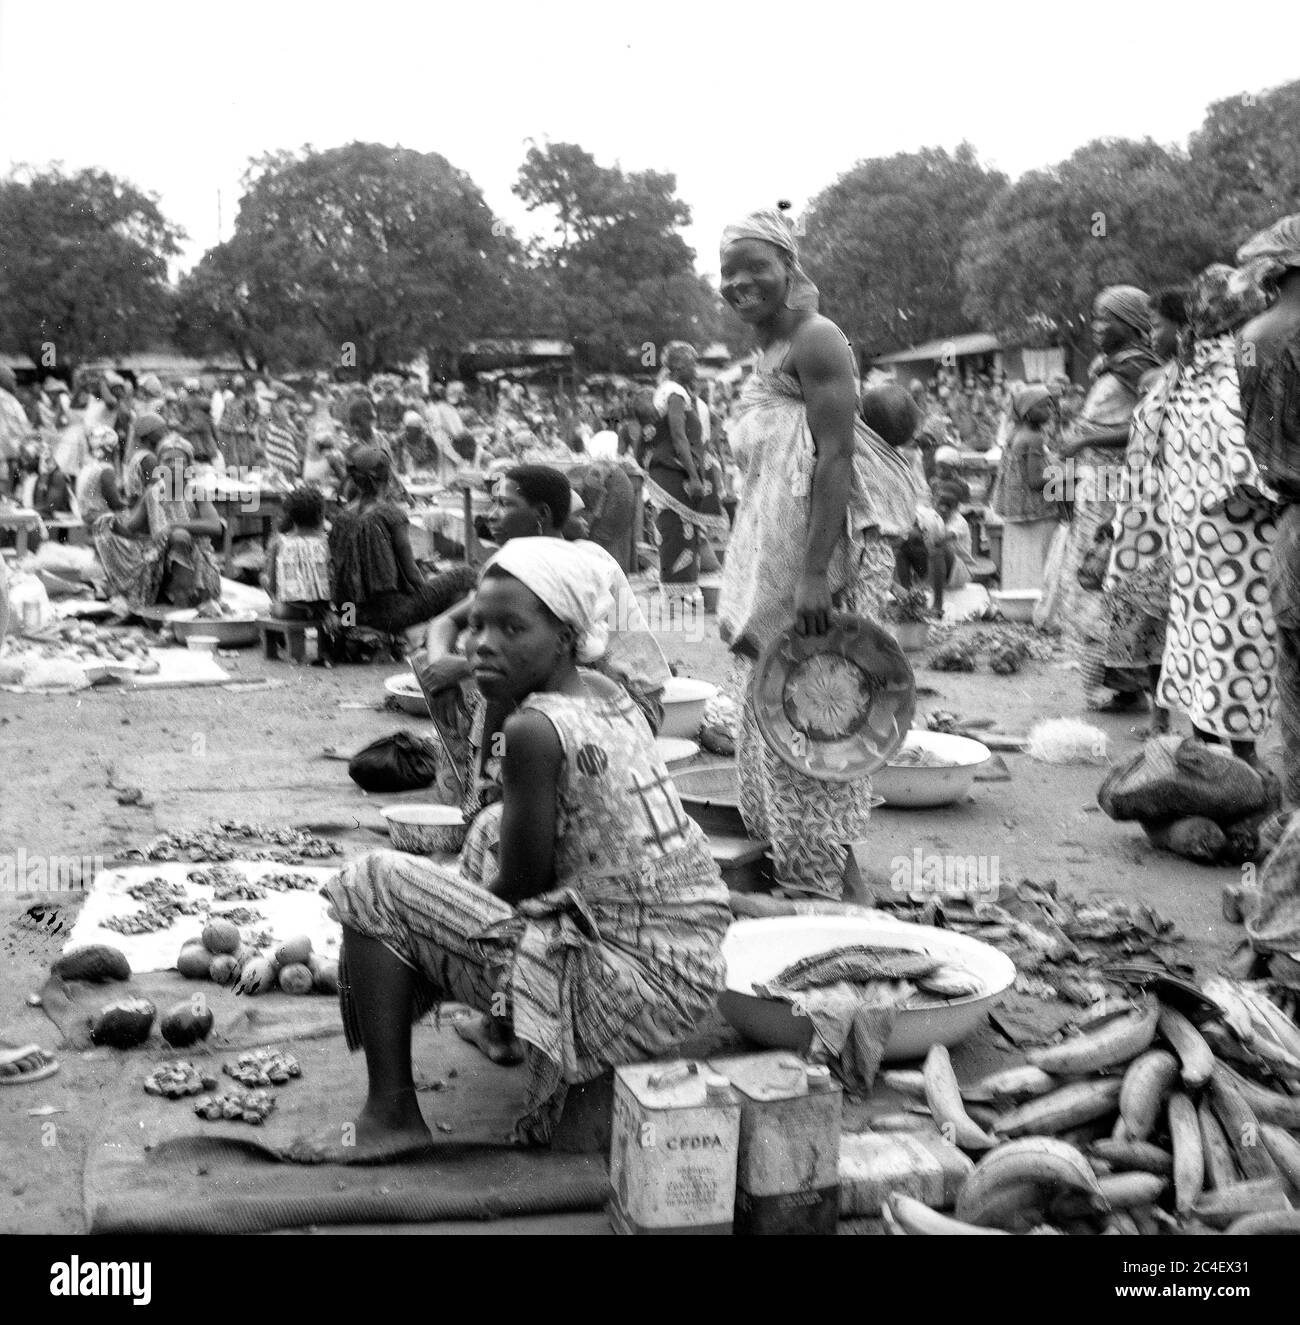 Women selling fruit and vegetables at open market in the Ivory Coast 1963 Cote d'Ivoire Ivory Coast 1960s Stock Photo